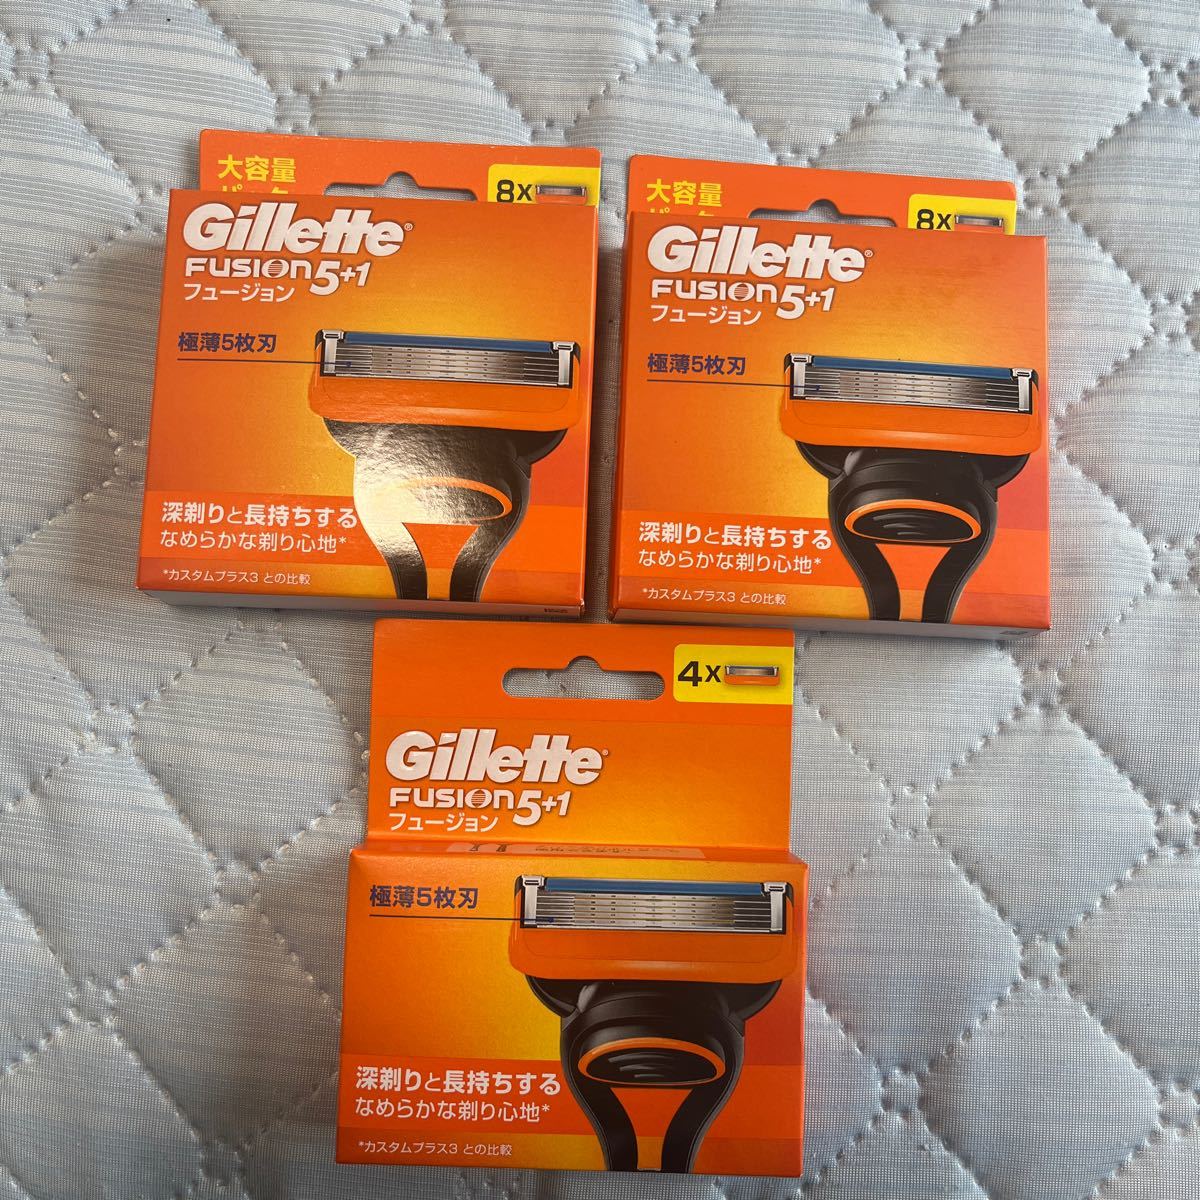 Gillette FUSION 5＋1 ジレットフュージョン替刃 8個入2個 4個入 1個 ジレットフュージョンGillette｜PayPayフリマ